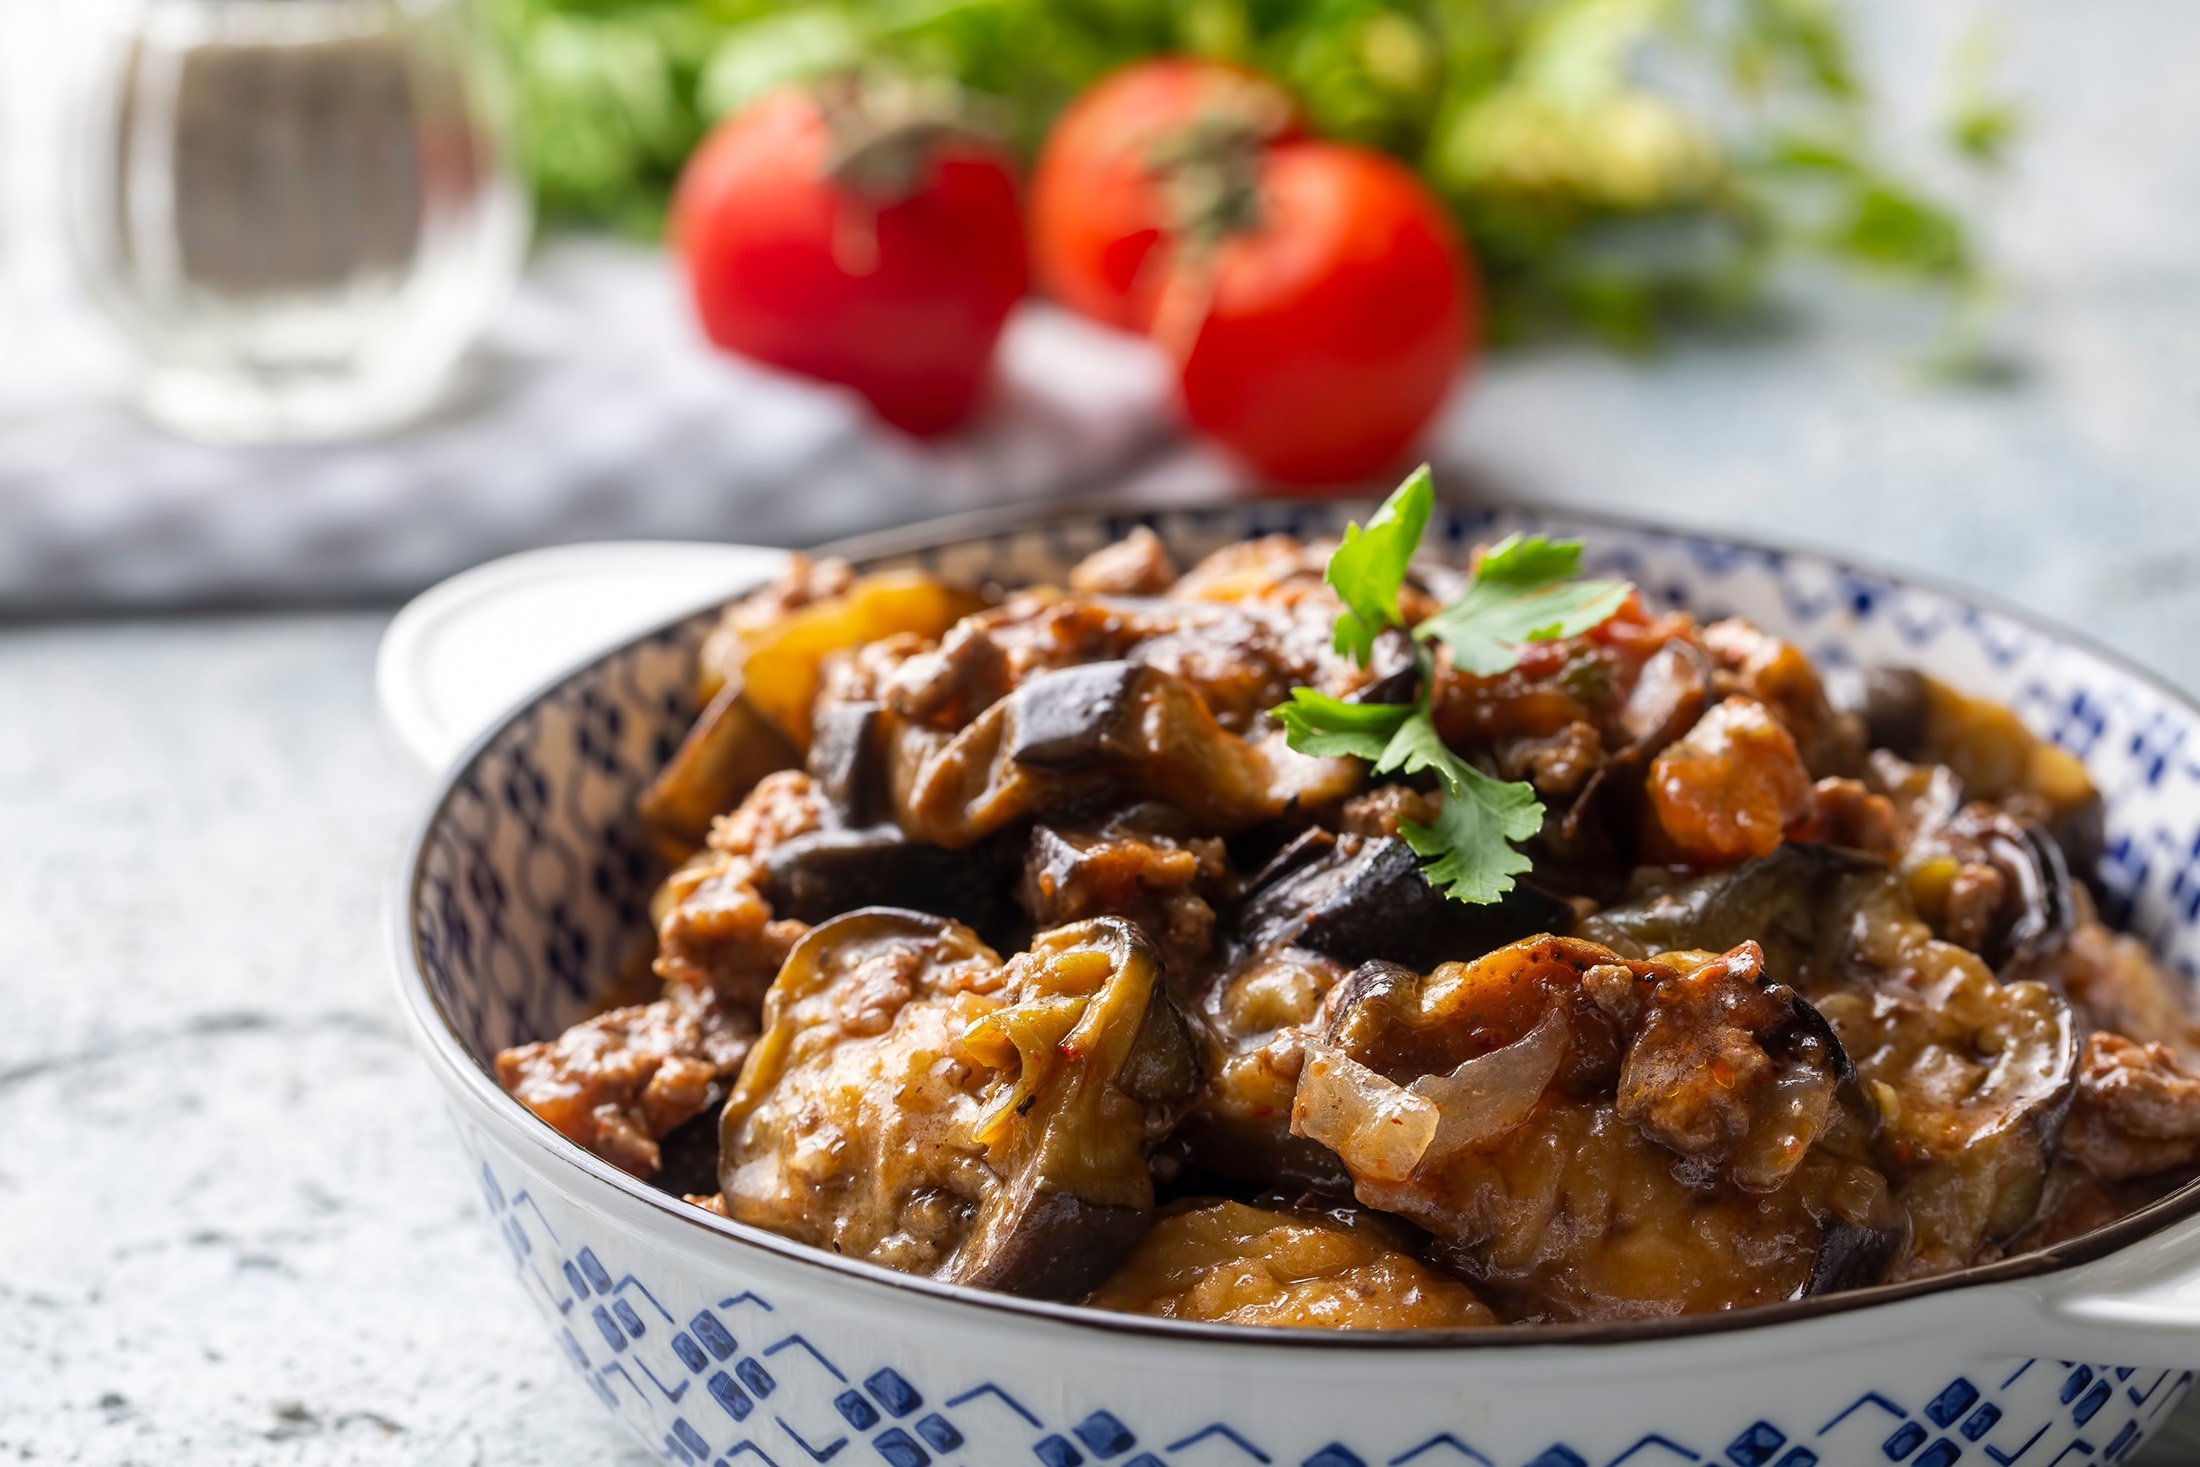 Musakka in Turkey is basically like a ratatouille of vegetables with the addition of spiced ground meat. (Shutterstock Photo)